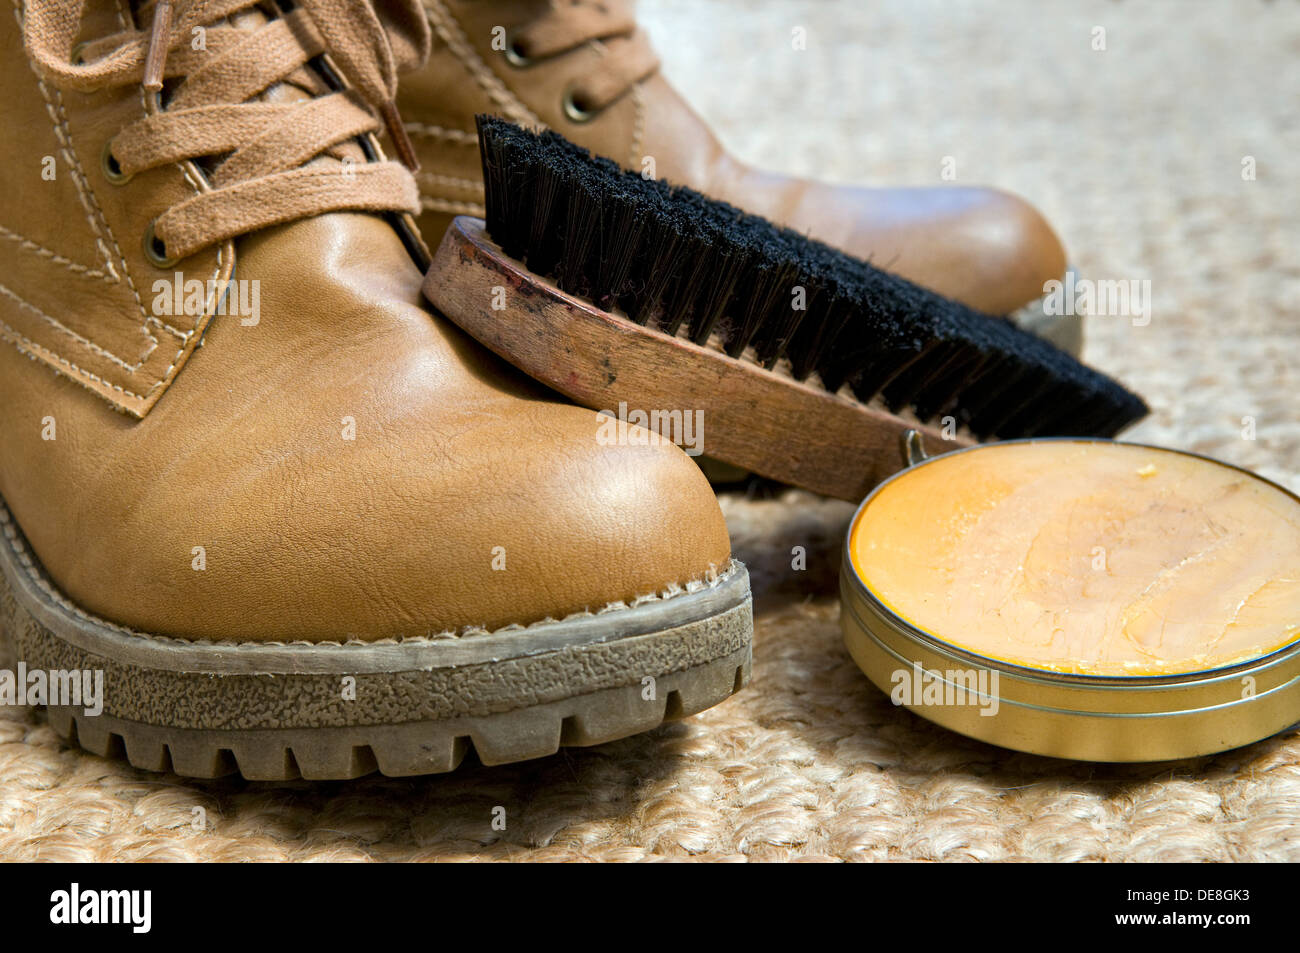 Tan shoe polish with brush and pair of boots waiting to be polished on  woven mat Stock Photo - Alamy